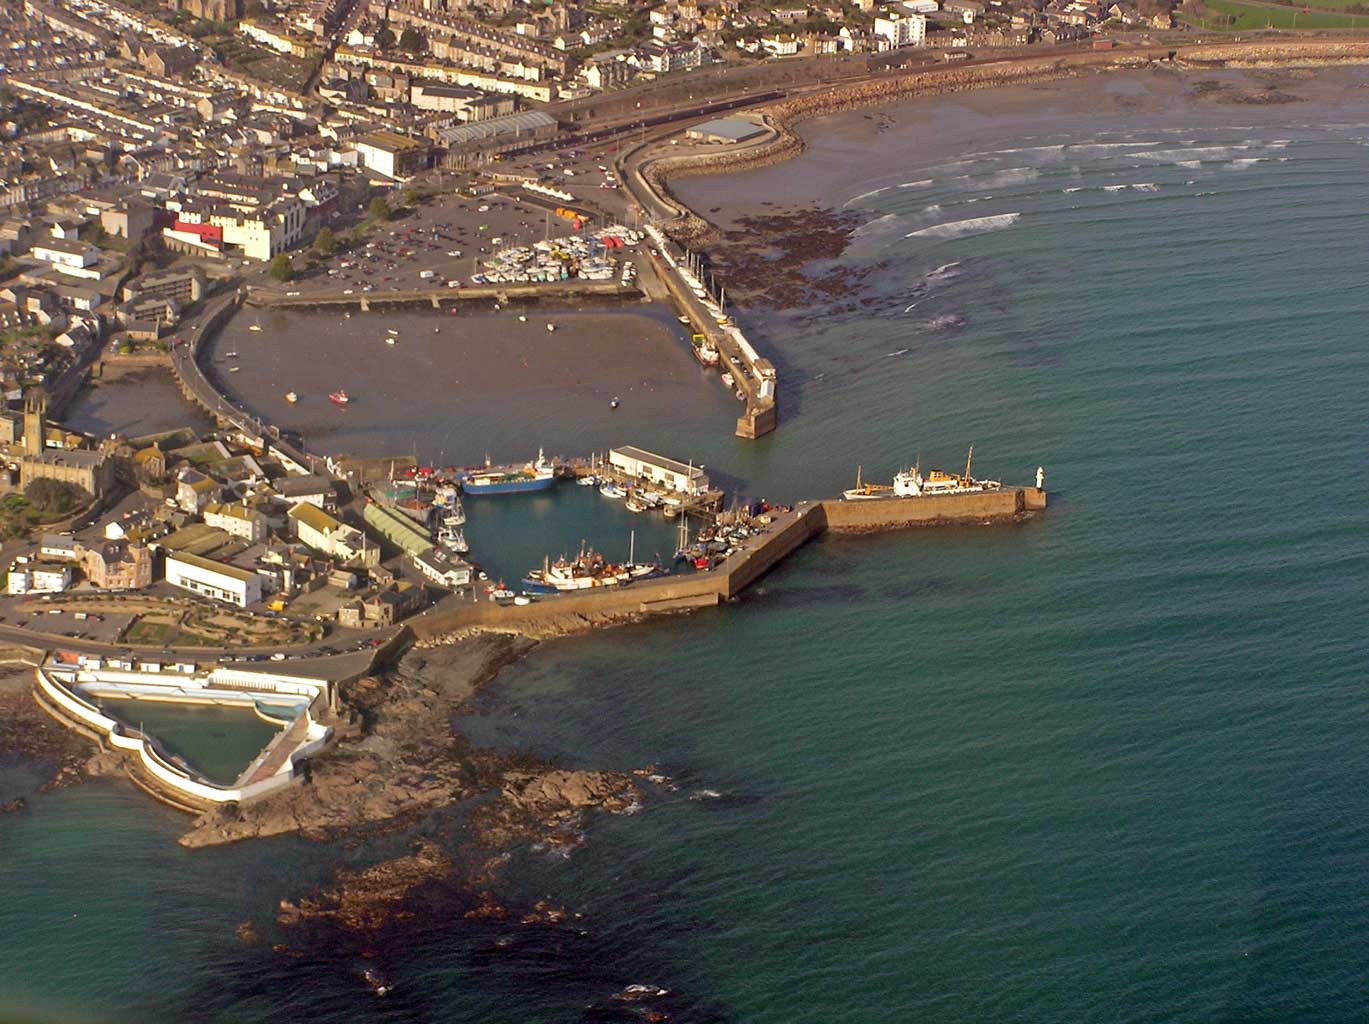 Penzance Harbour and Jubilee Pool - taken from flight trip in light aircraft from Land's End Airport